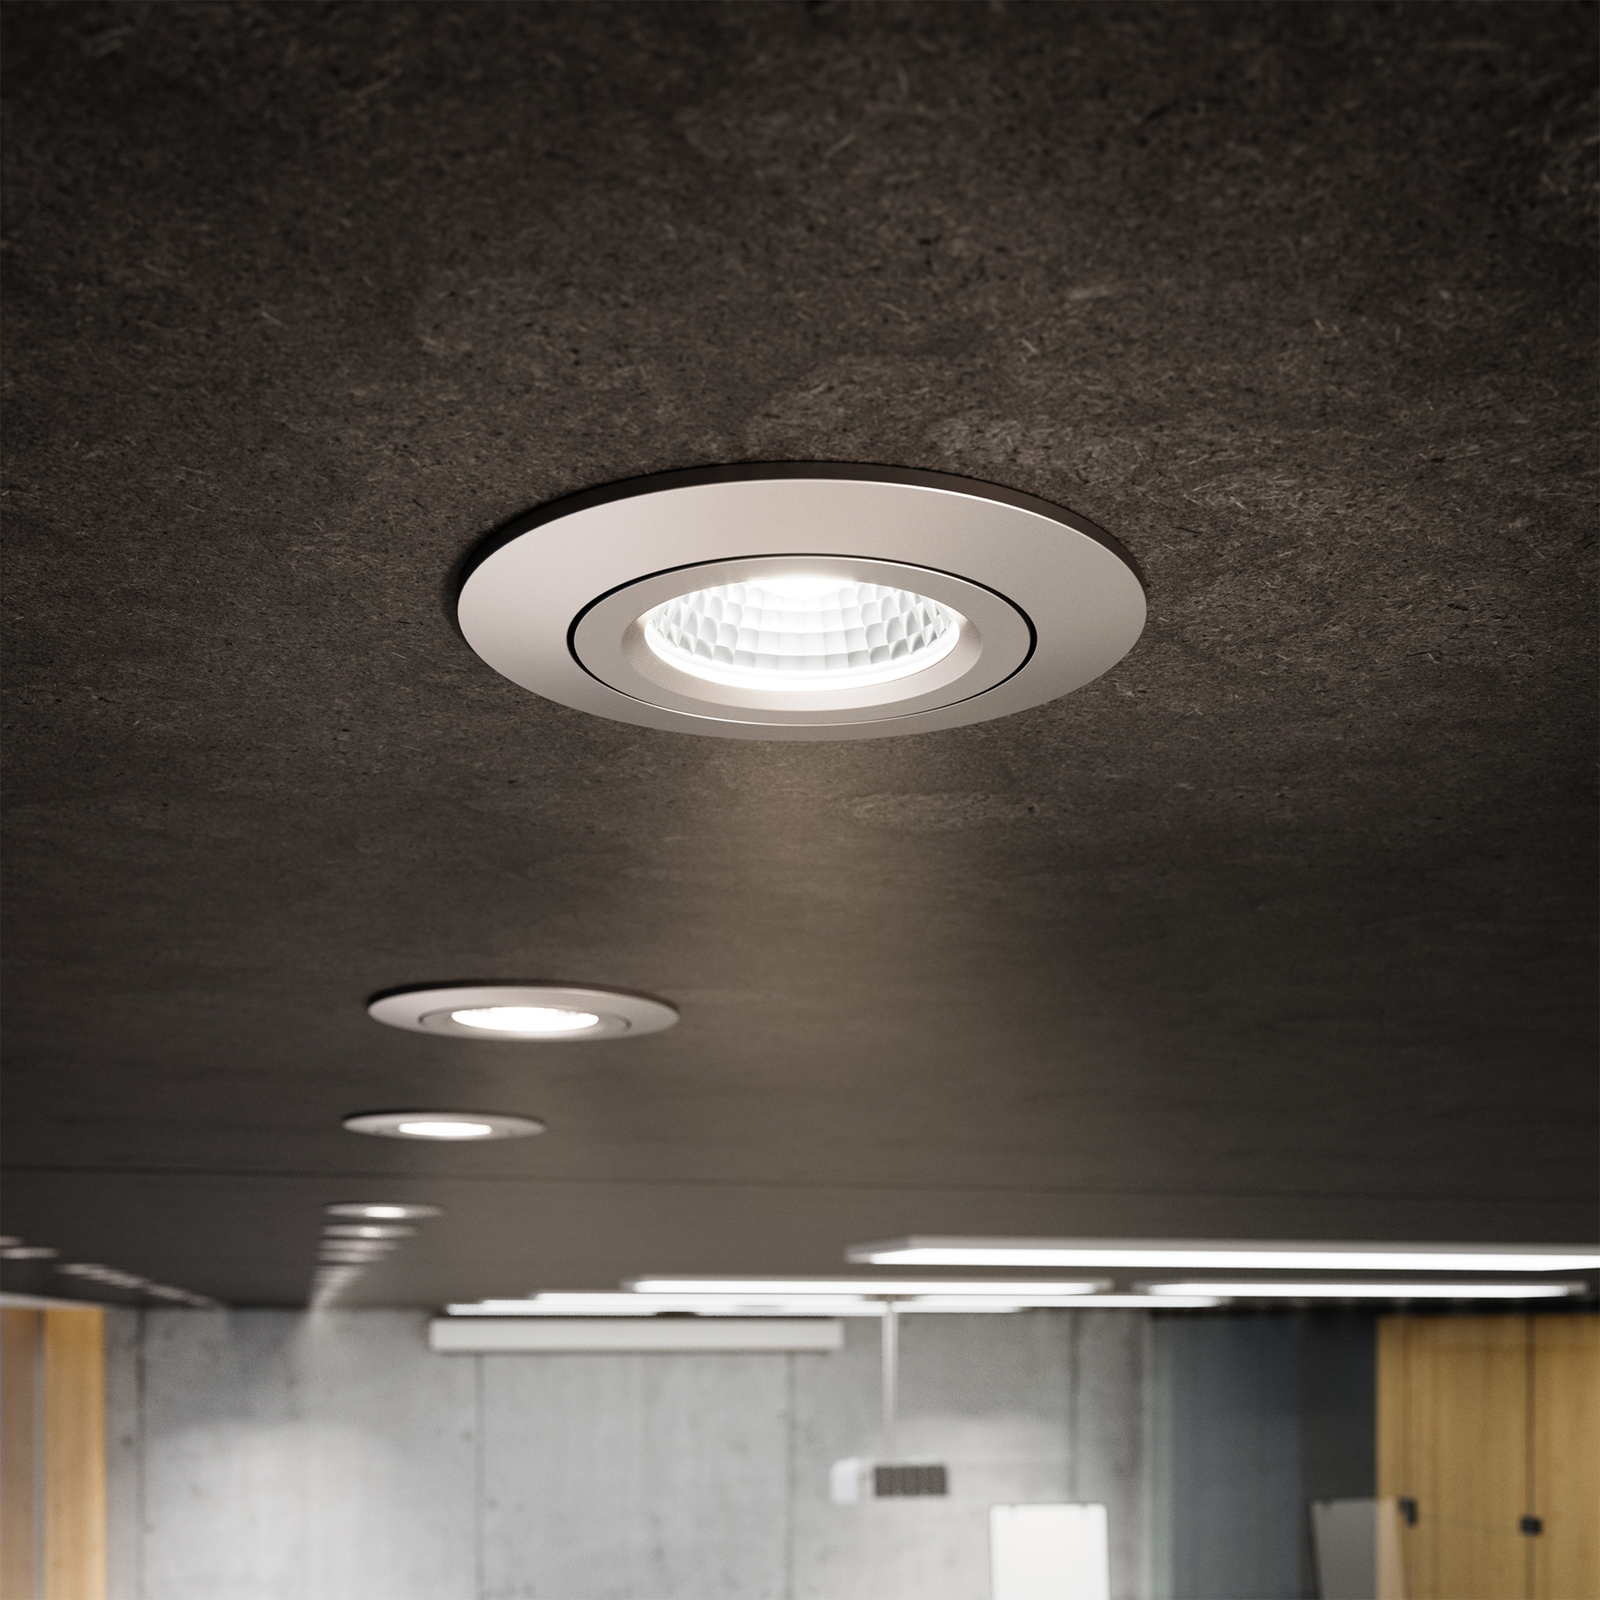 Diled LED recessed ceiling spotlight, Ø8.5cm, 10 W, dimmable, steel